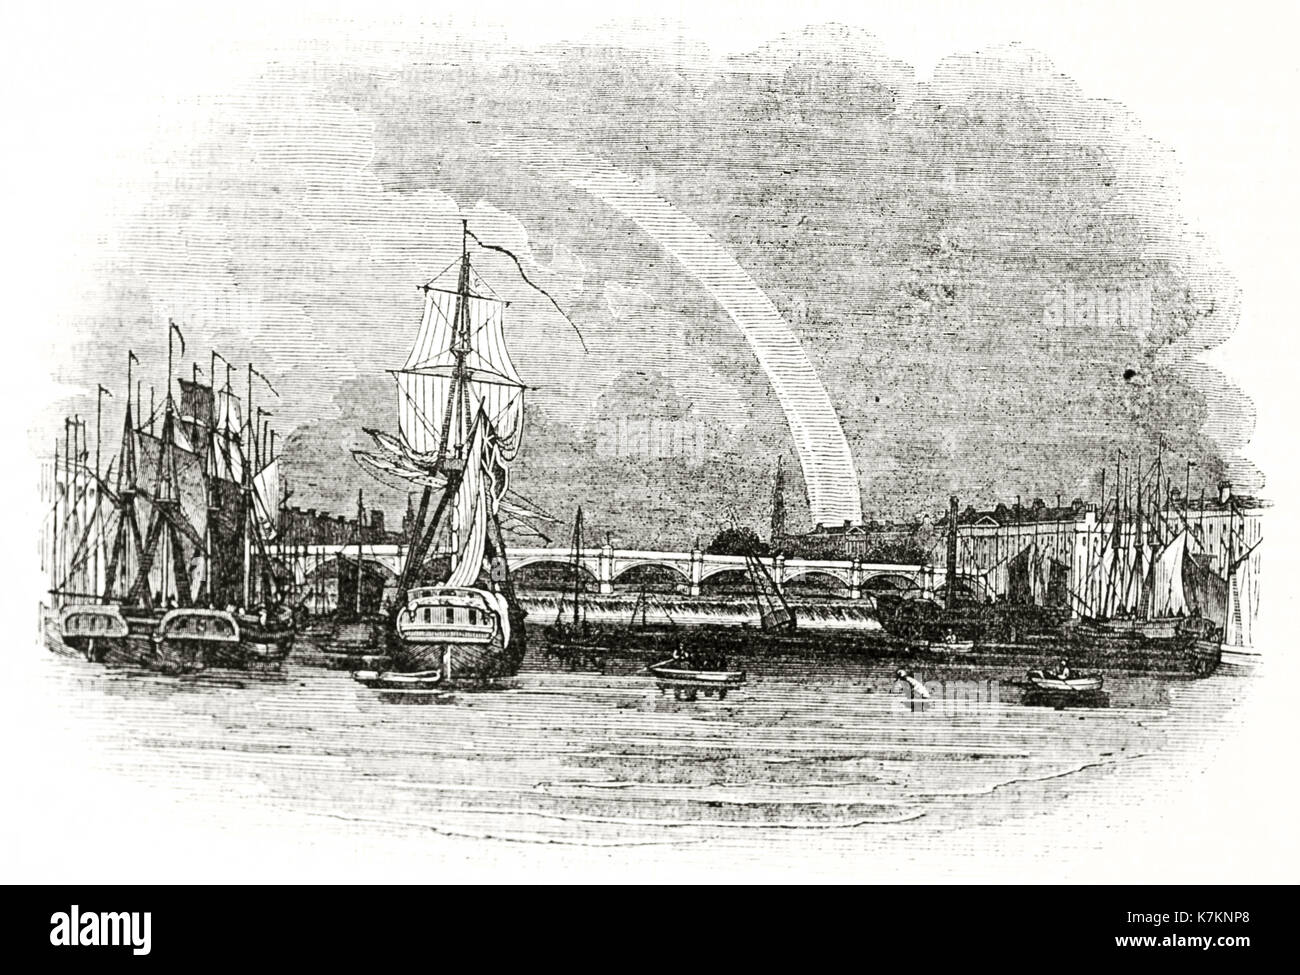 Old view of Broomielaw bridge, Glasgow. By unidentified author, publ. on The Penny Magazine, London, 1837 Stock Photo